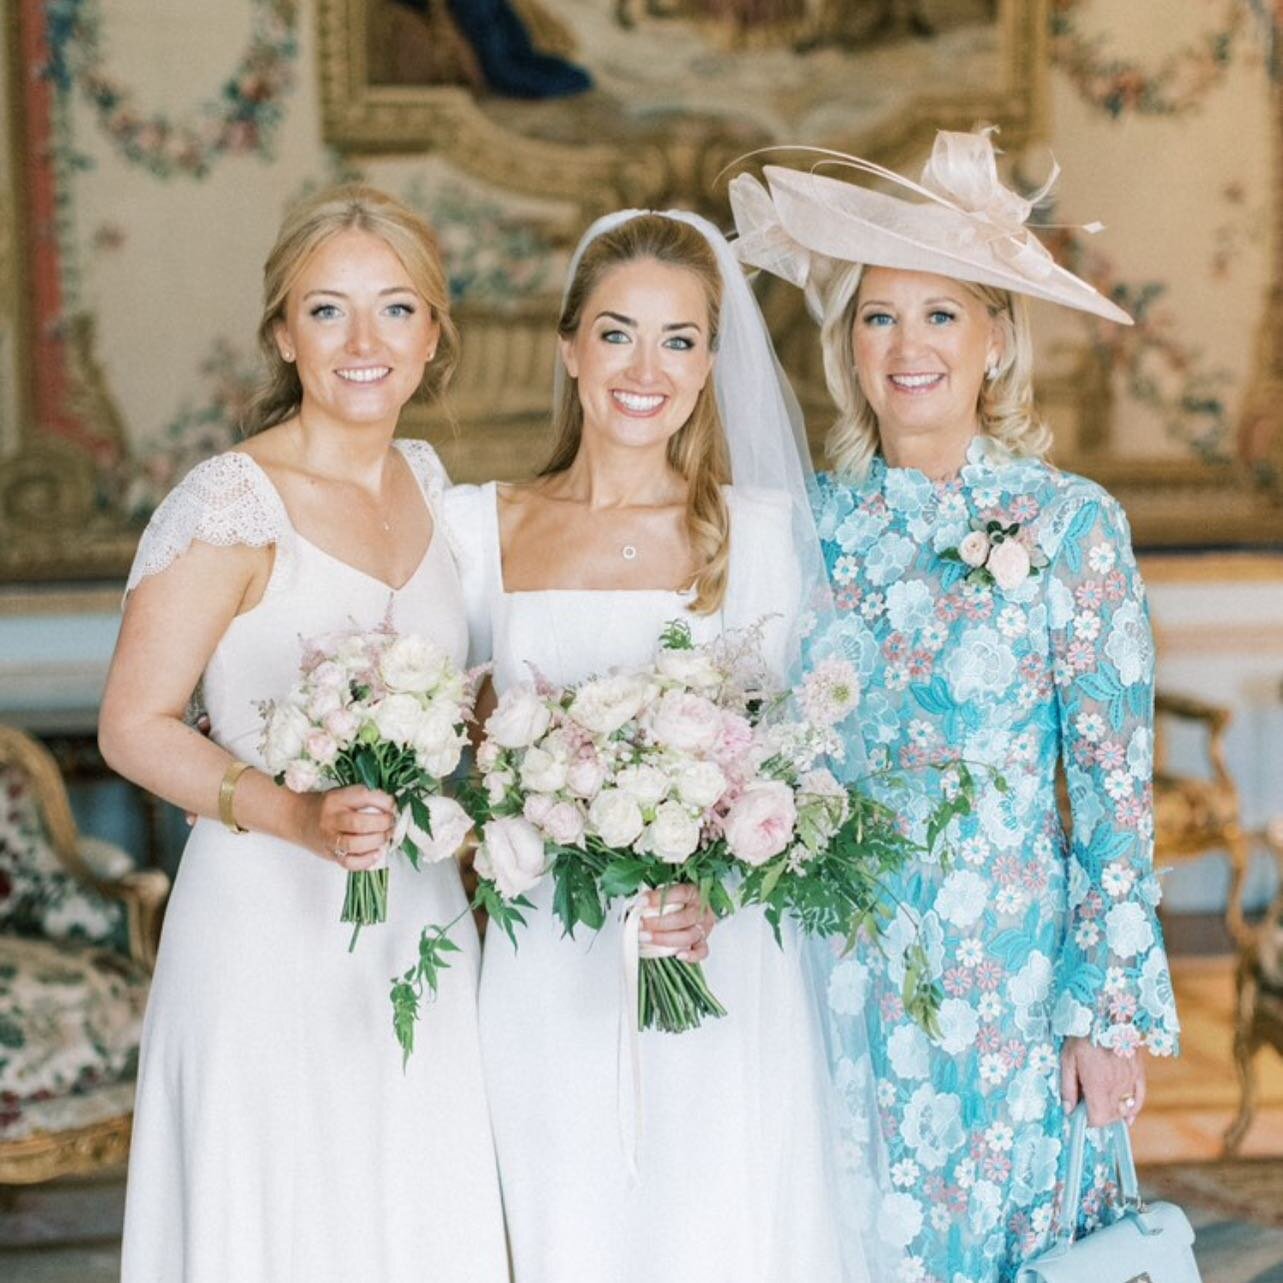 HOLLY // they say a picture speaks a thousand words and this one really does! You looked absolutely stunning on your wedding day! Your mum and sister look so incredibly proud to be right there with you. Thank you for having us to be part of a very sp